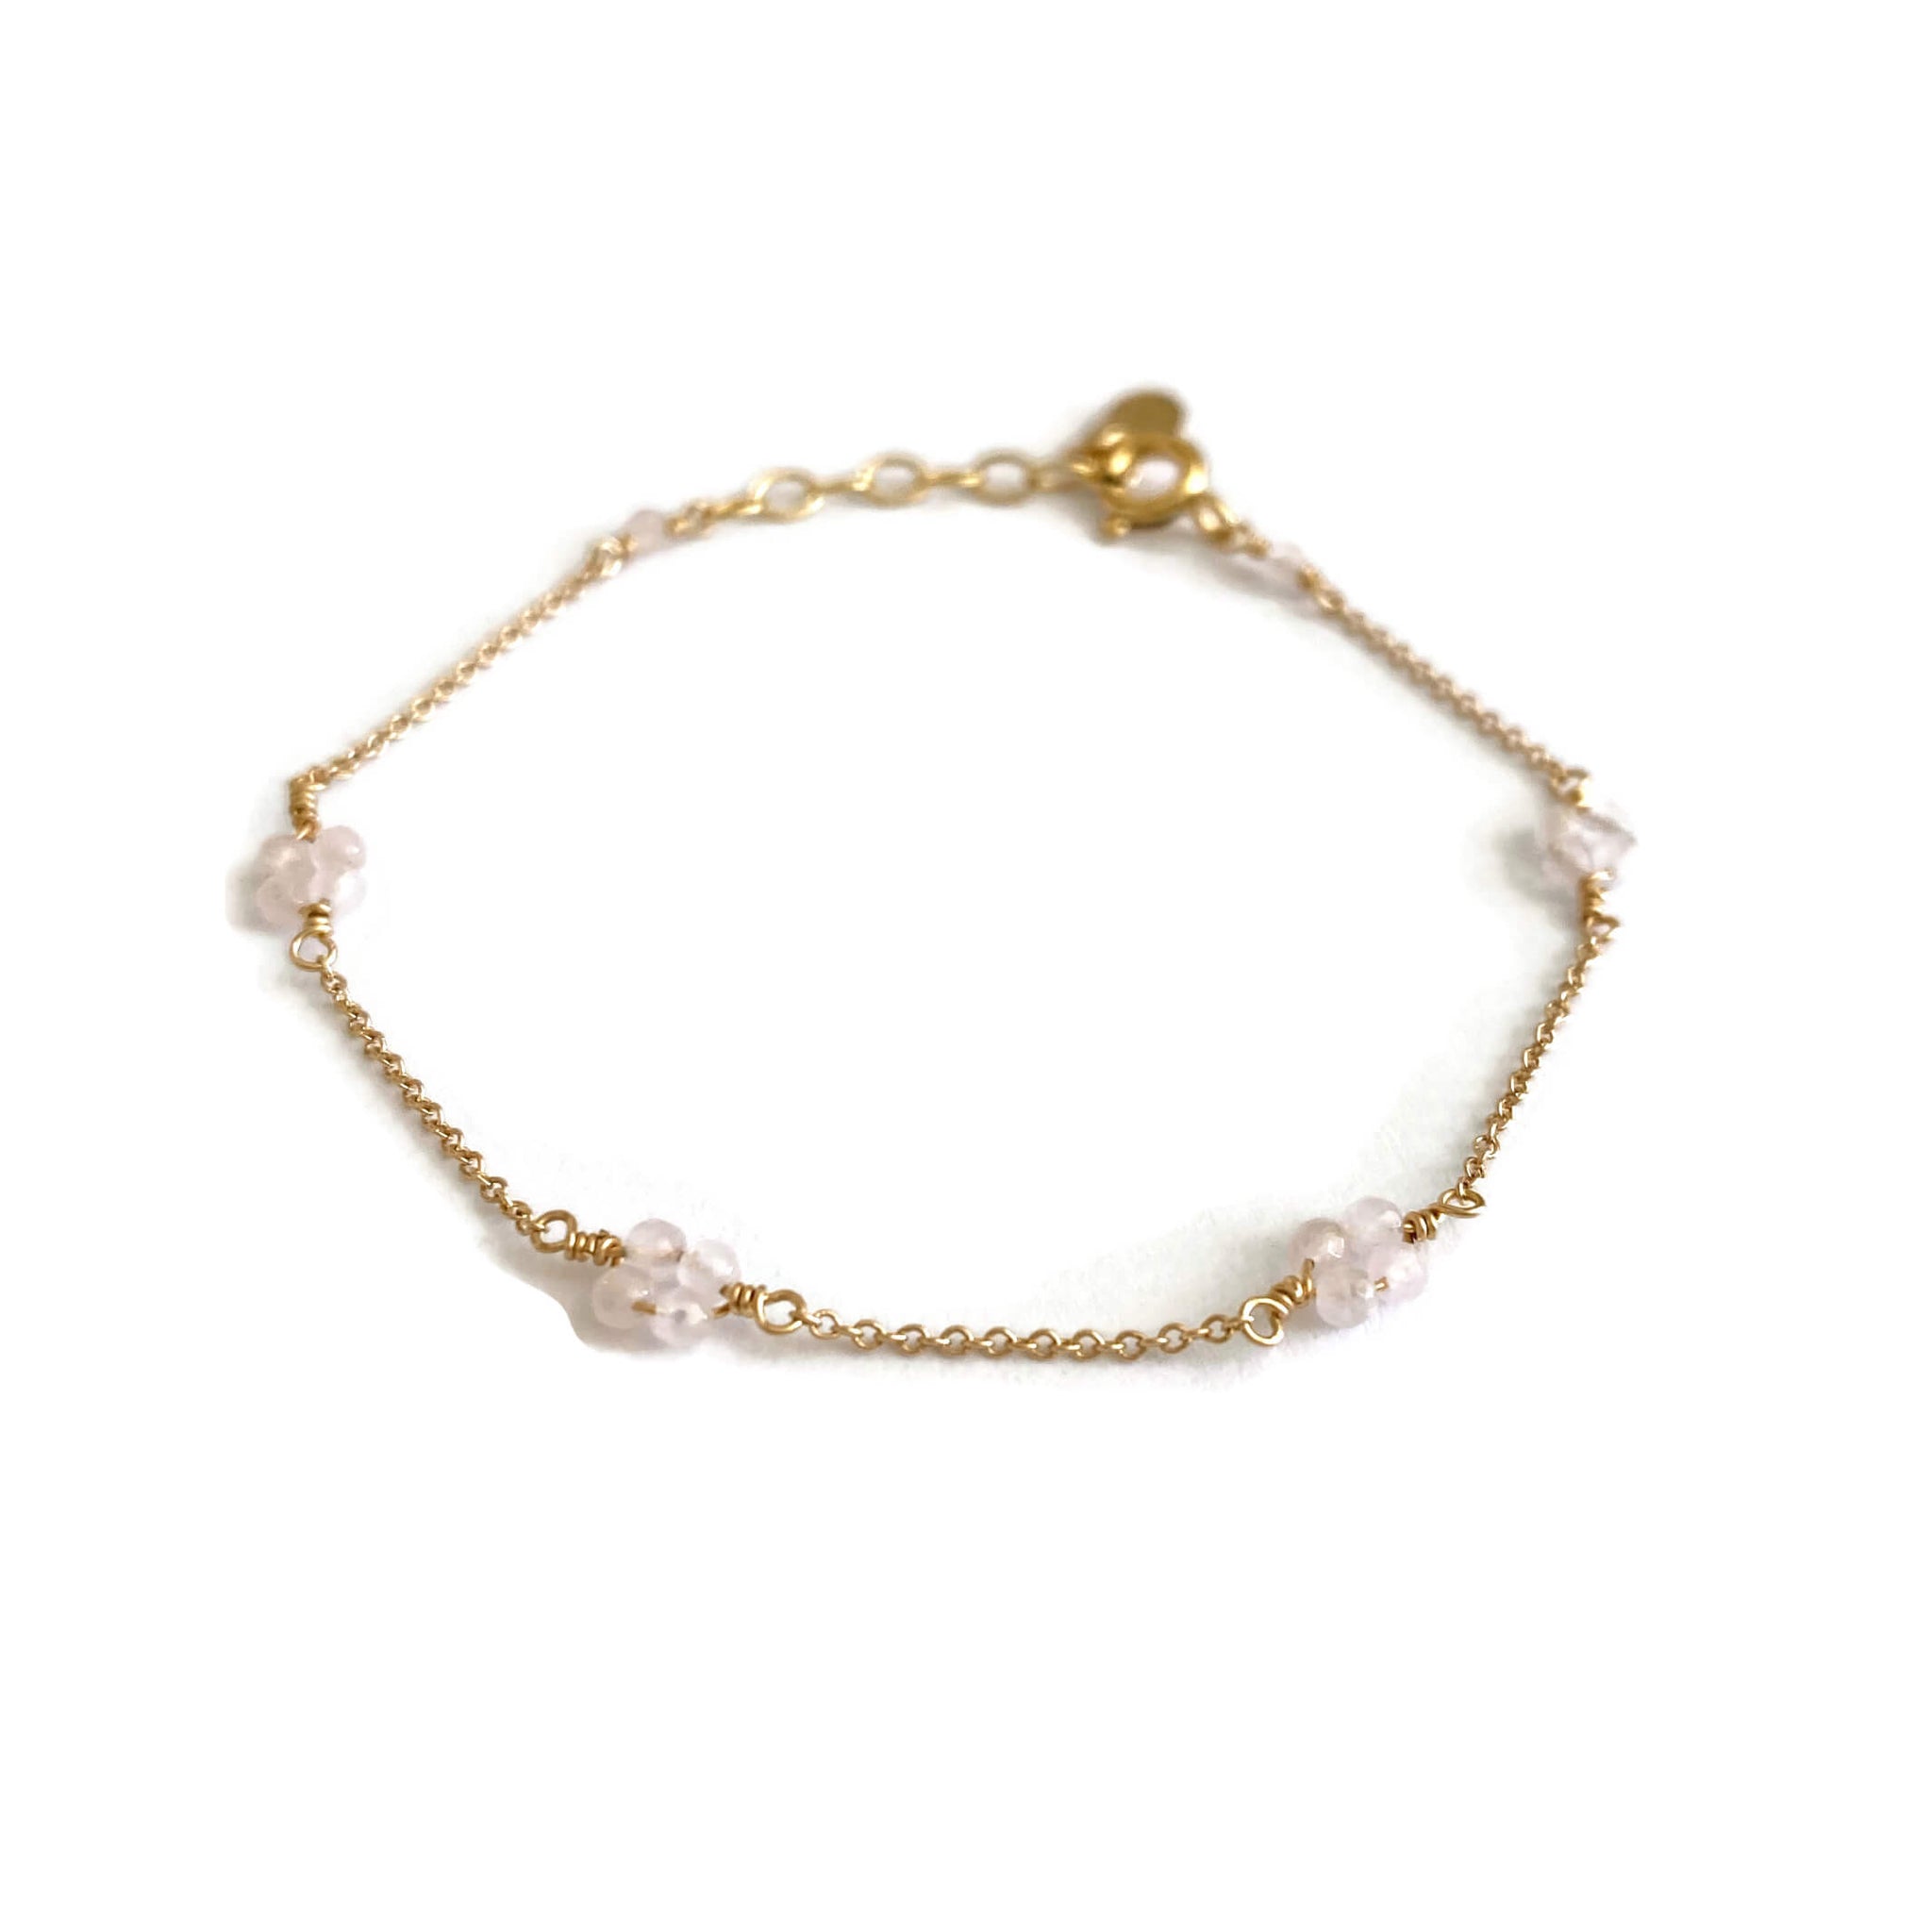 This dainty rose quartz bracelet can be made in 14k solid gold, gold filled or sterling silver. 